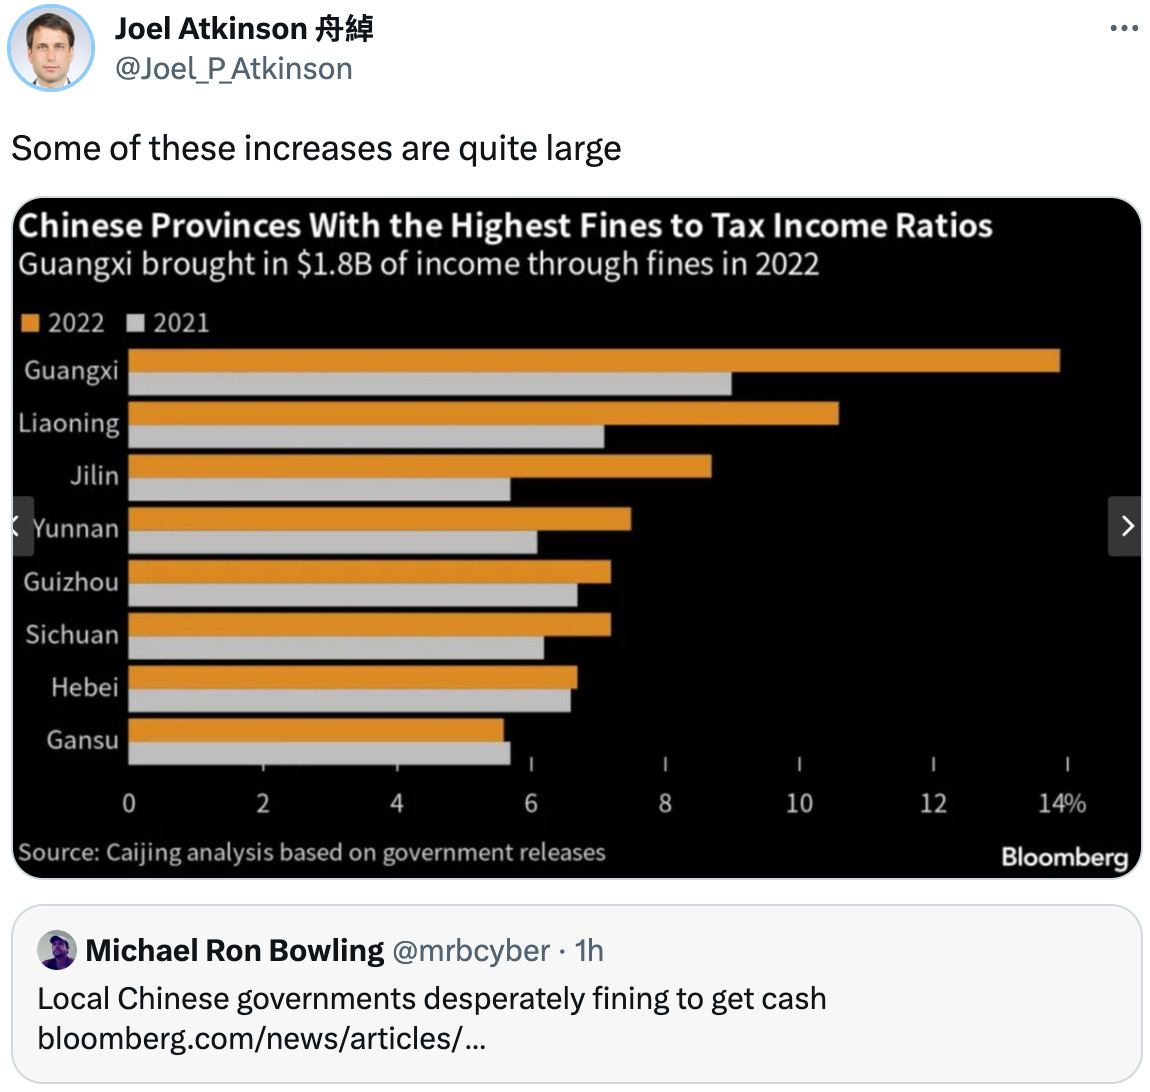  Joel Atkinson 舟綽 @Joel_P_Atkinson Some of these increases are quite large Quote Tweet Michael Ron Bowling @mrbcyber · 1h Local Chinese governments desperately fining to get cash https://bloomberg.com/news/articles/2023-06-11/esoteric-fines-pile-up-as-china-s-provinces-hunt-for-revenue#xj4y7vzkg